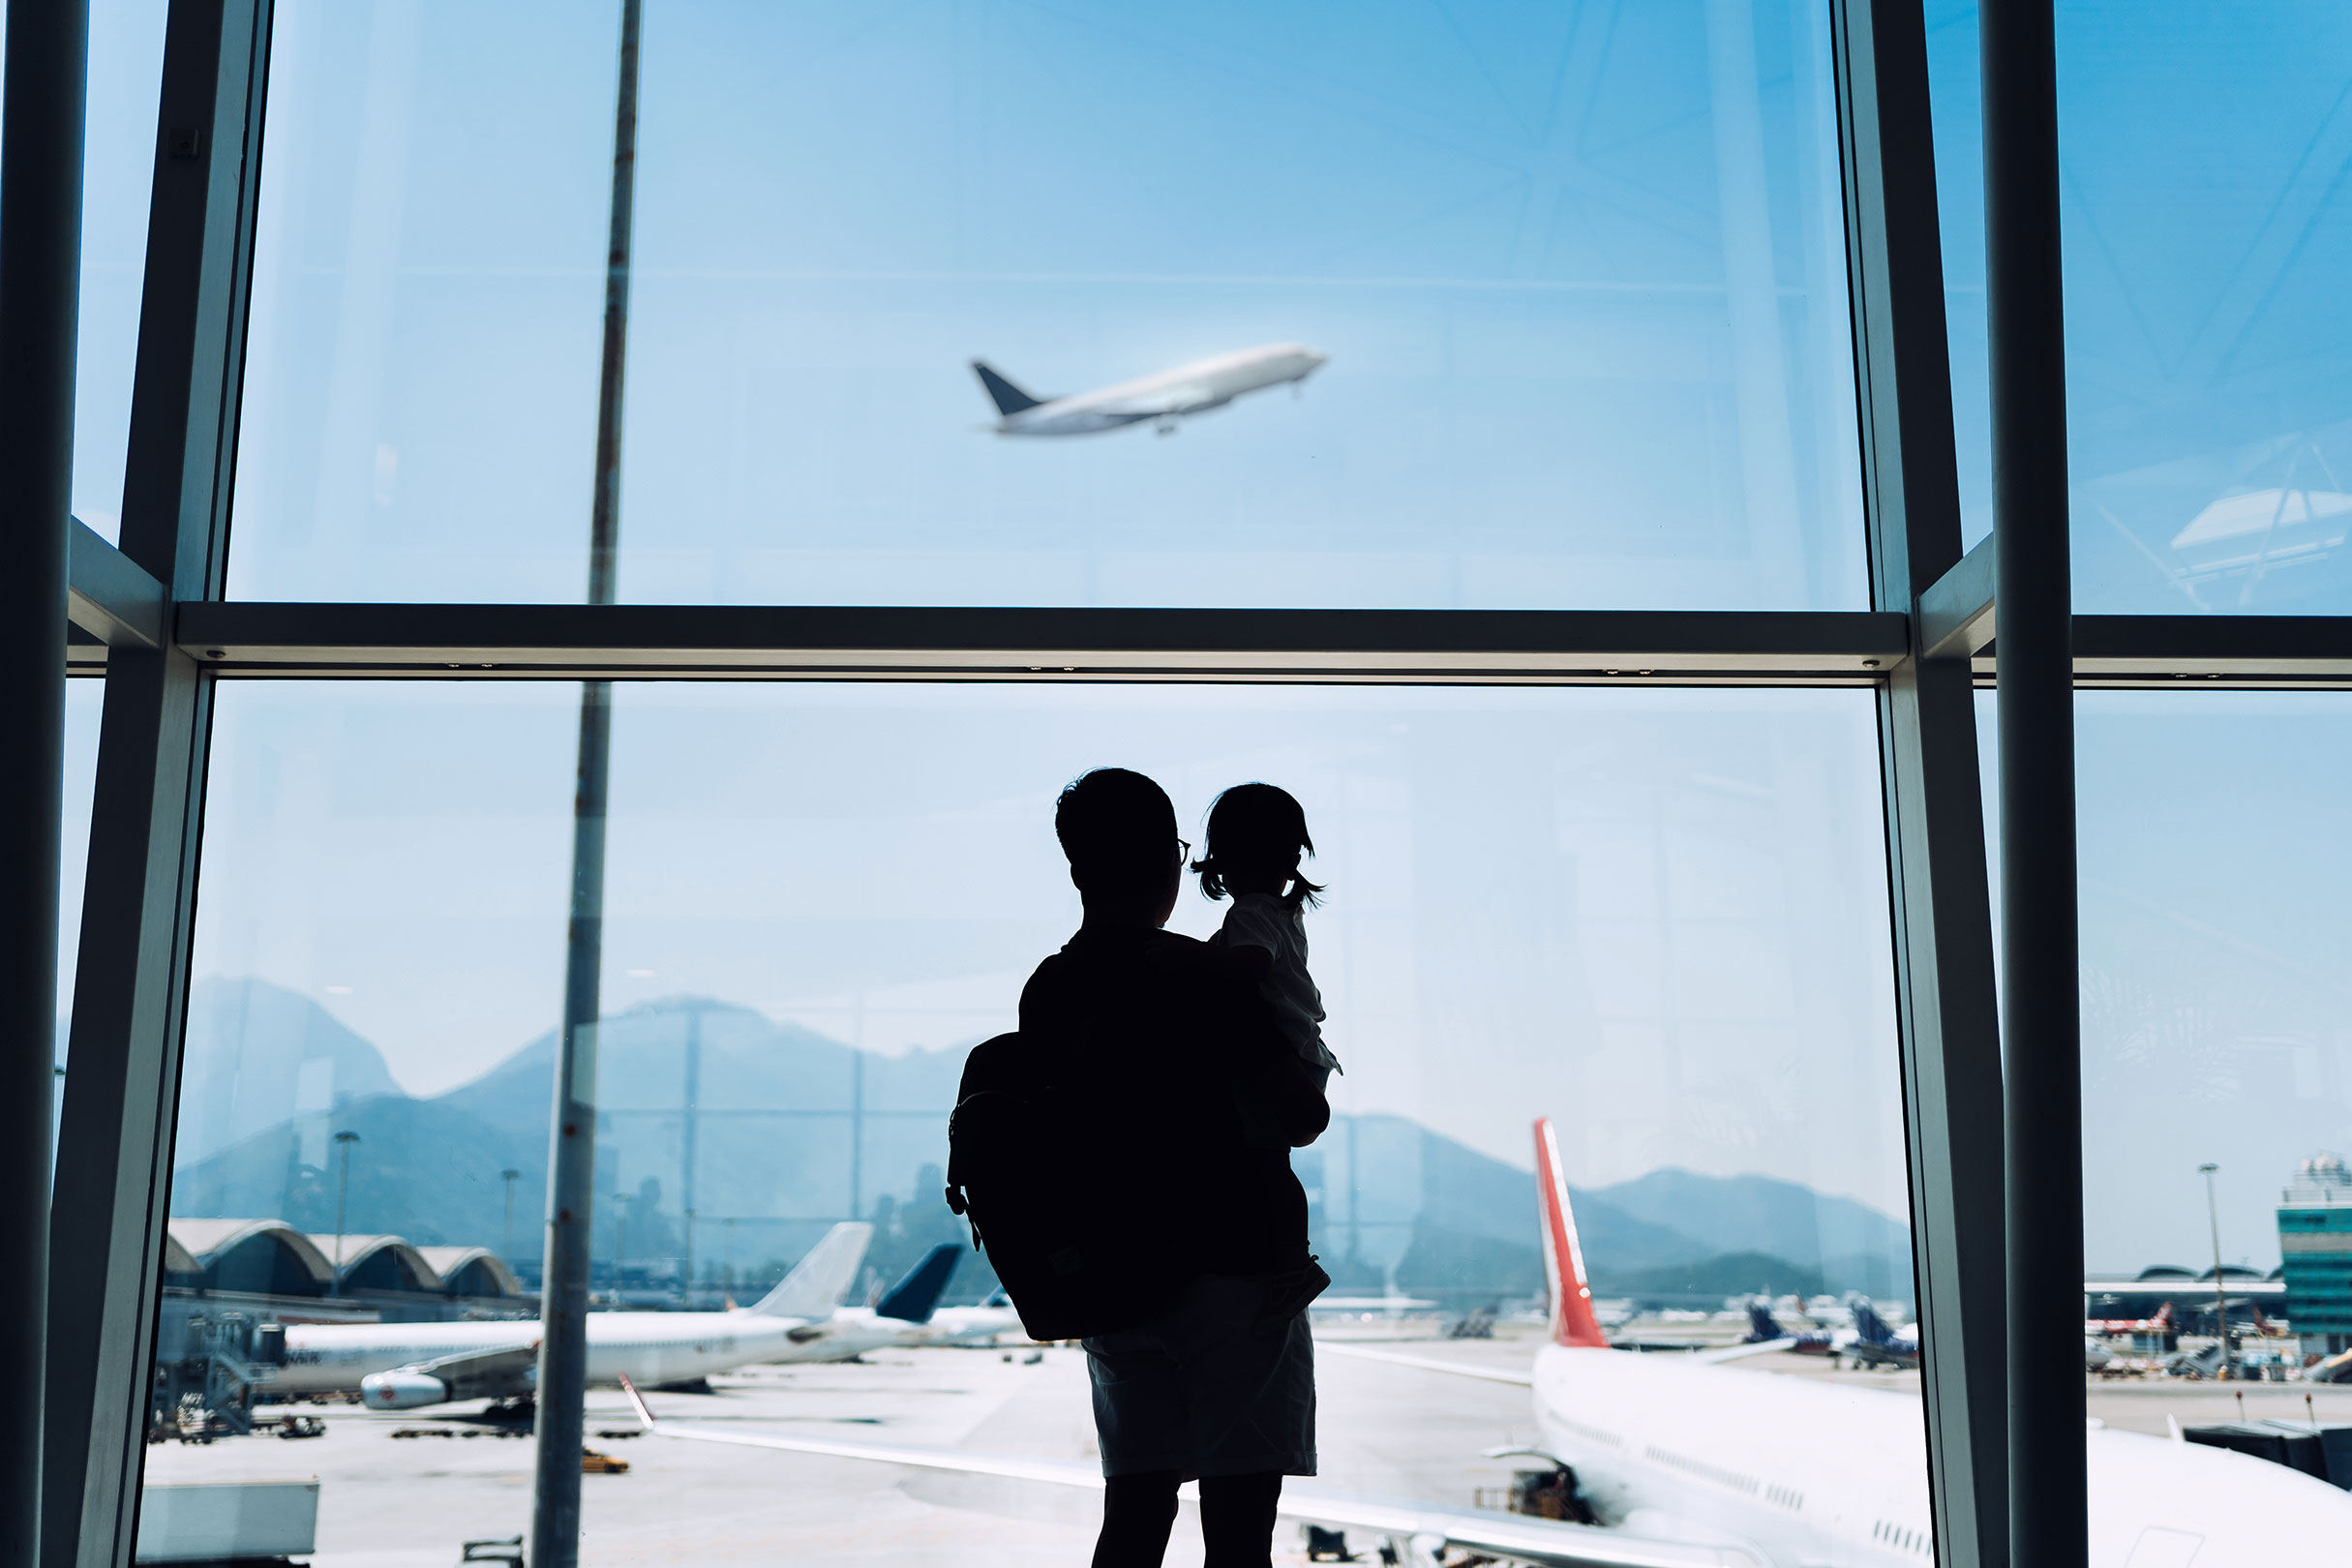 Image of a father and child at the airport